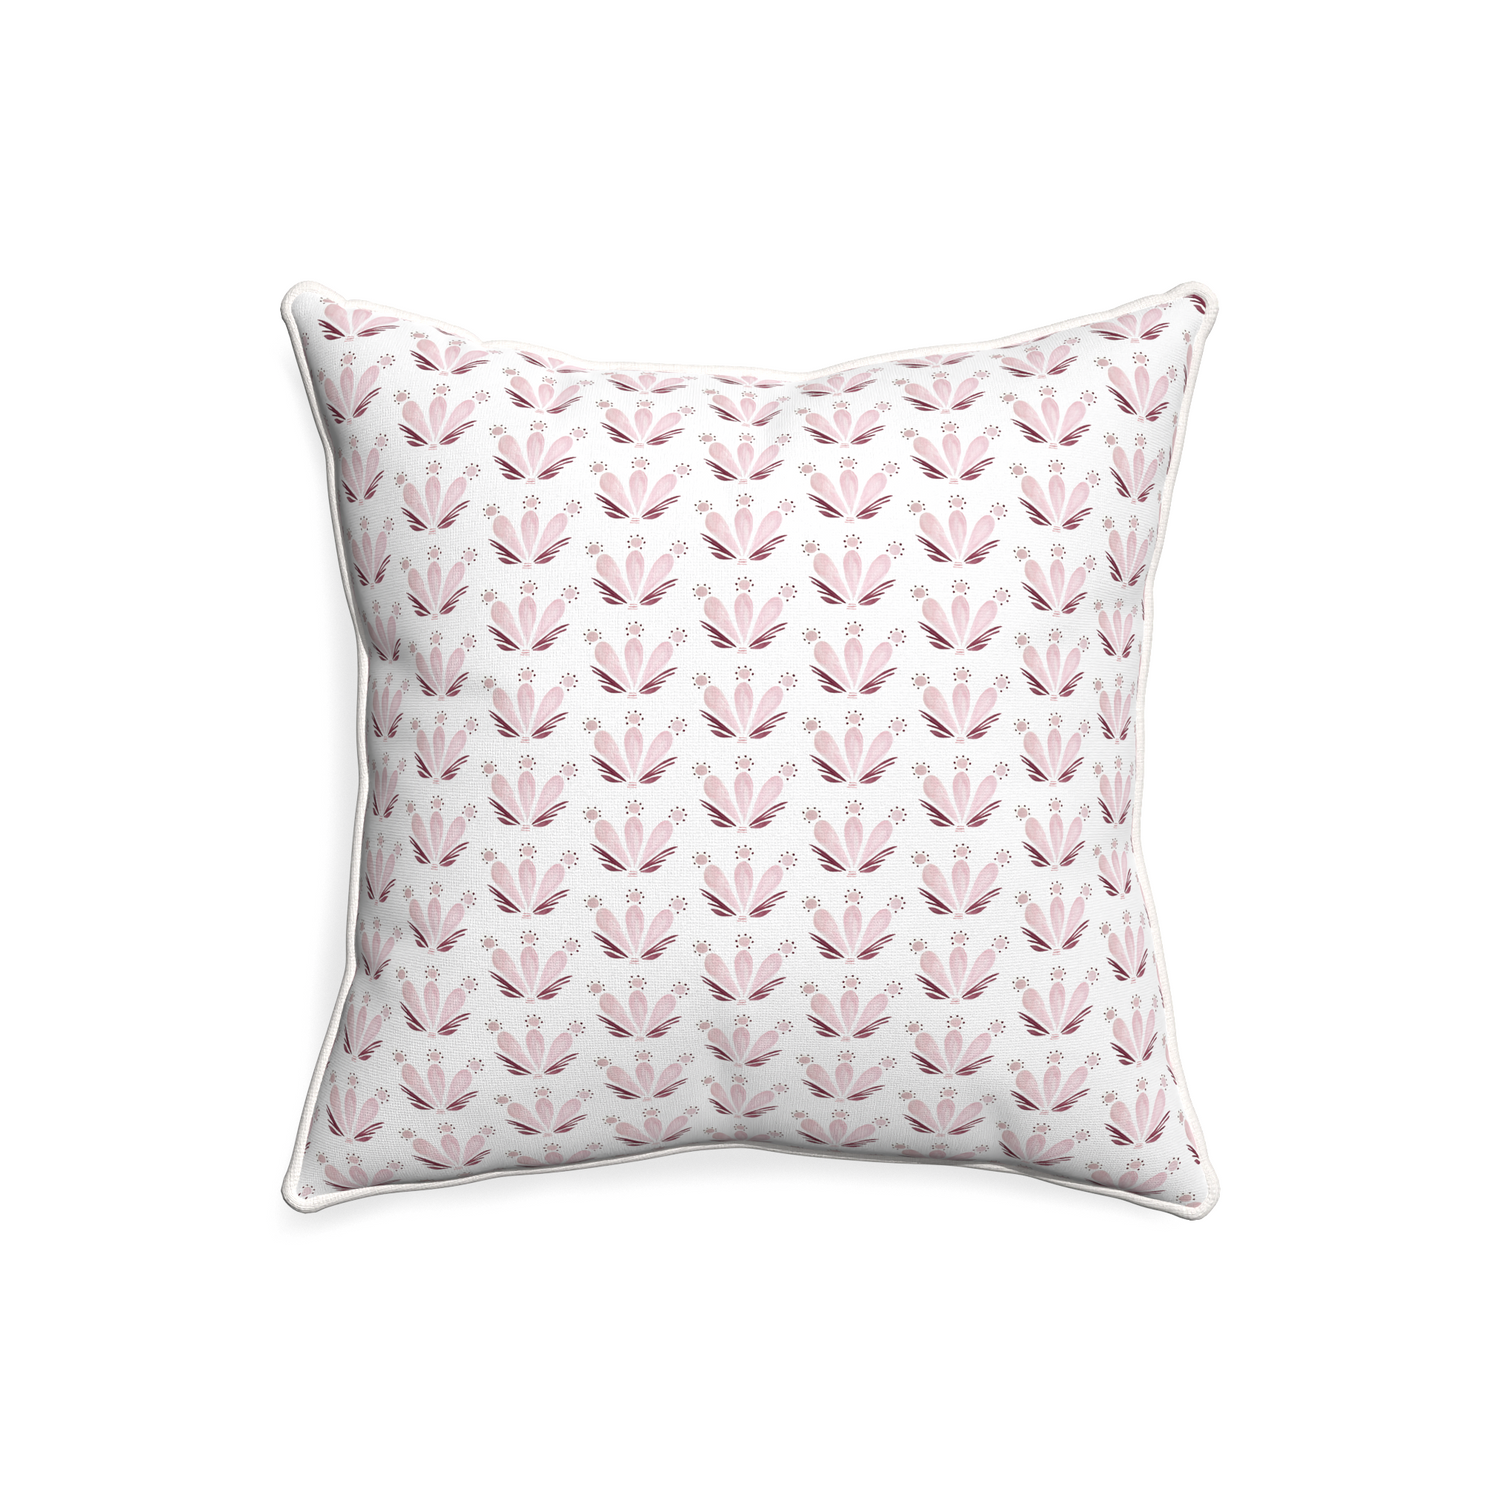 20-square serena pink custom pillow with snow piping on white background